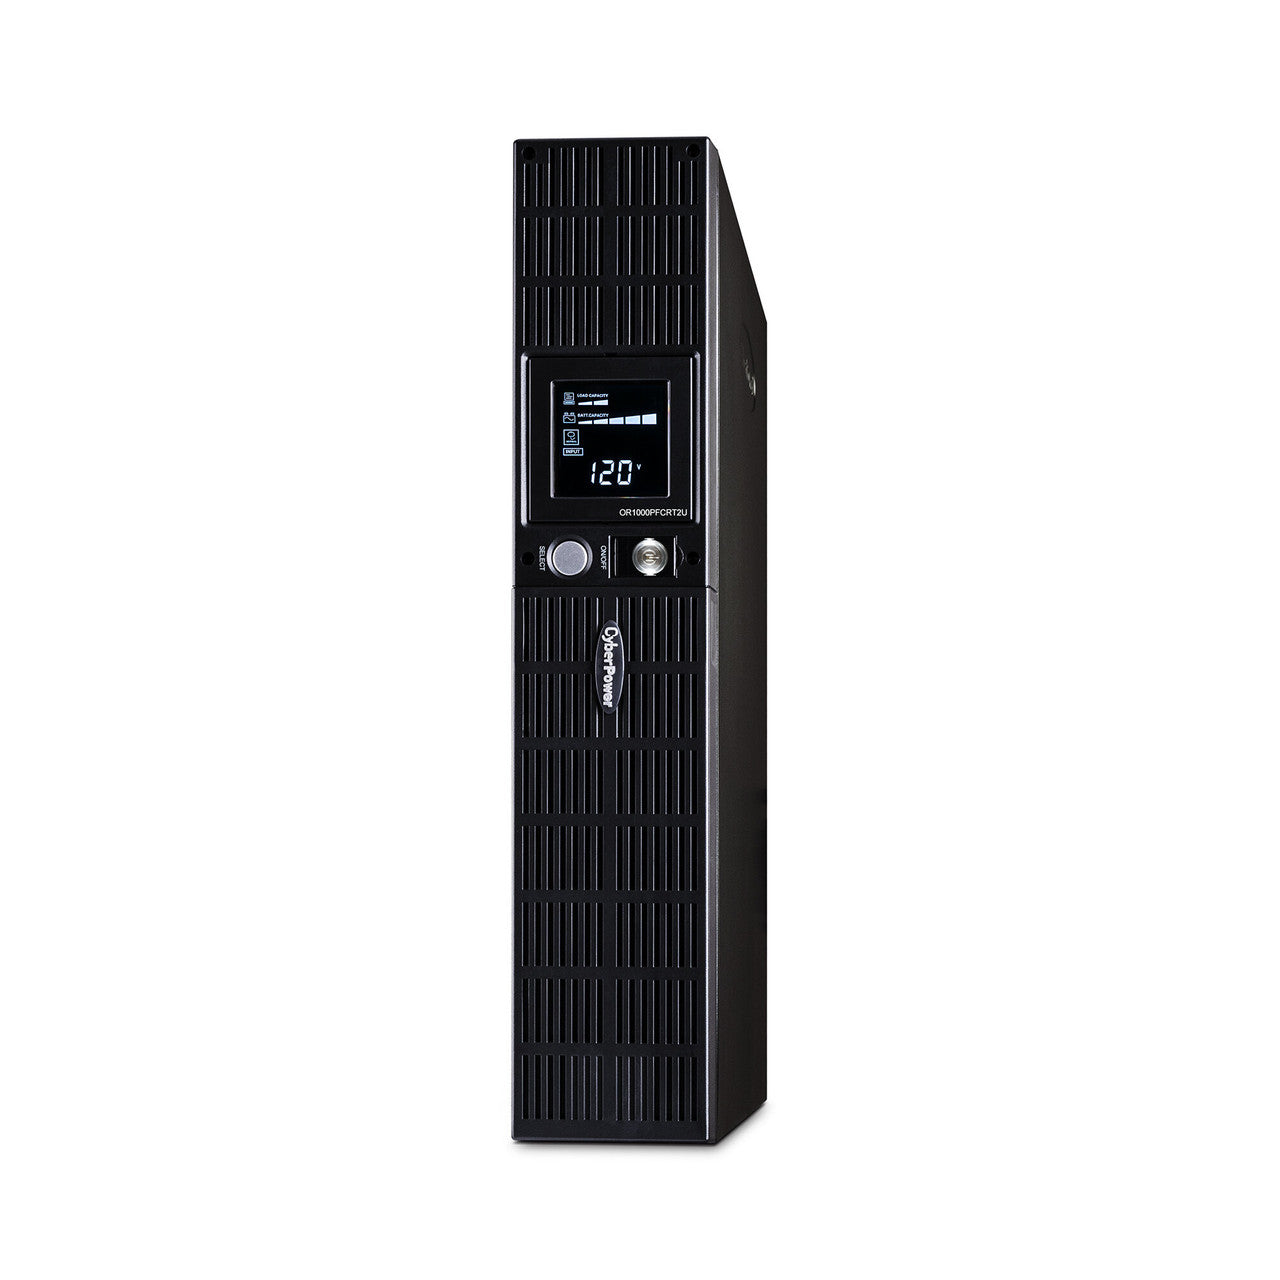 CyberPower OR1000PFCRT2U 1000VA/700W Rack/Tower UPS with 8 outlets Sine Wave output AVR and LCD